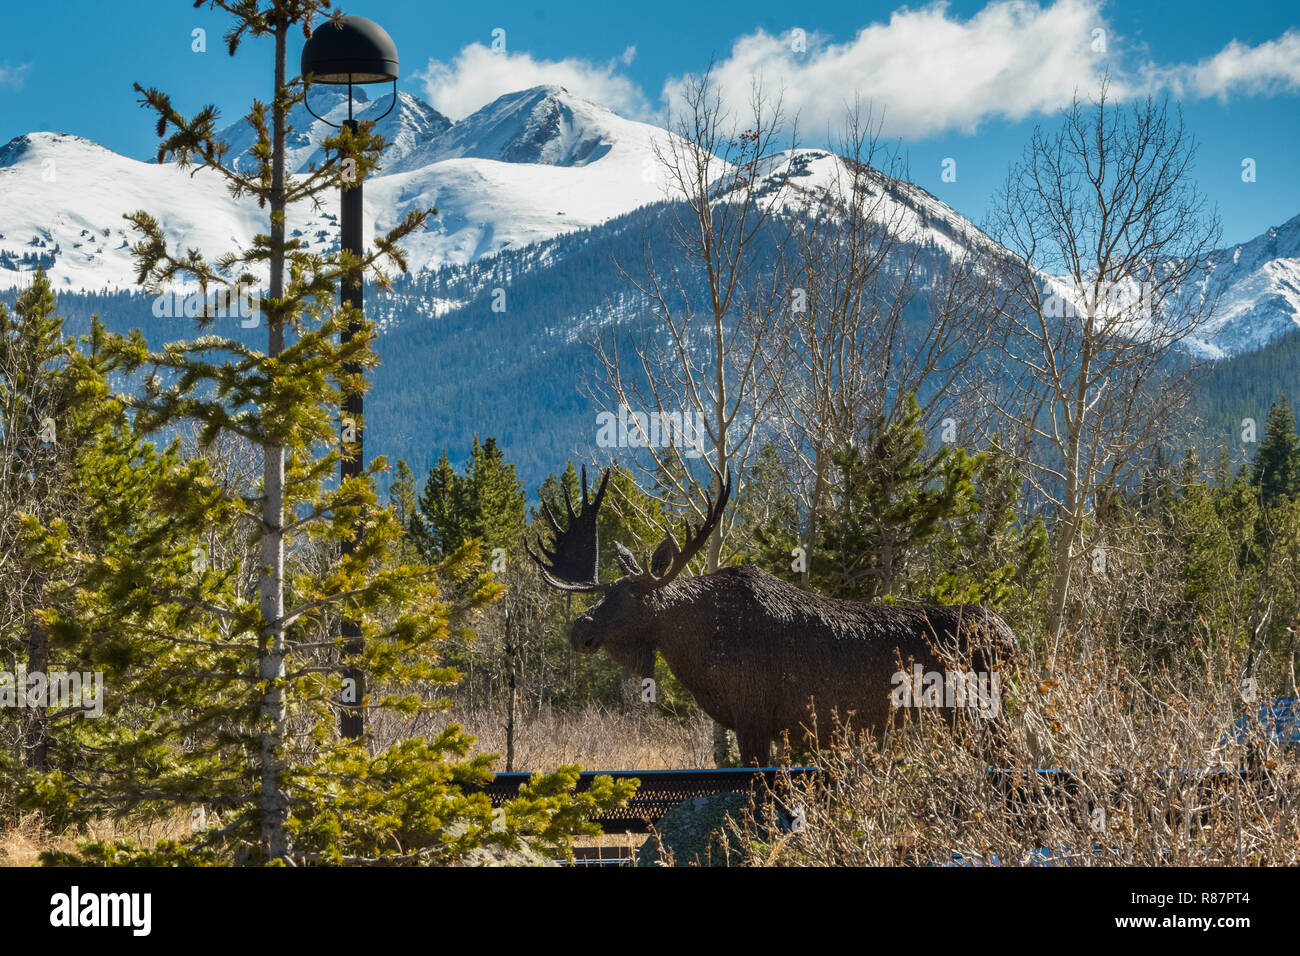 Moose entrance to State Park in Colorado Stock Photo